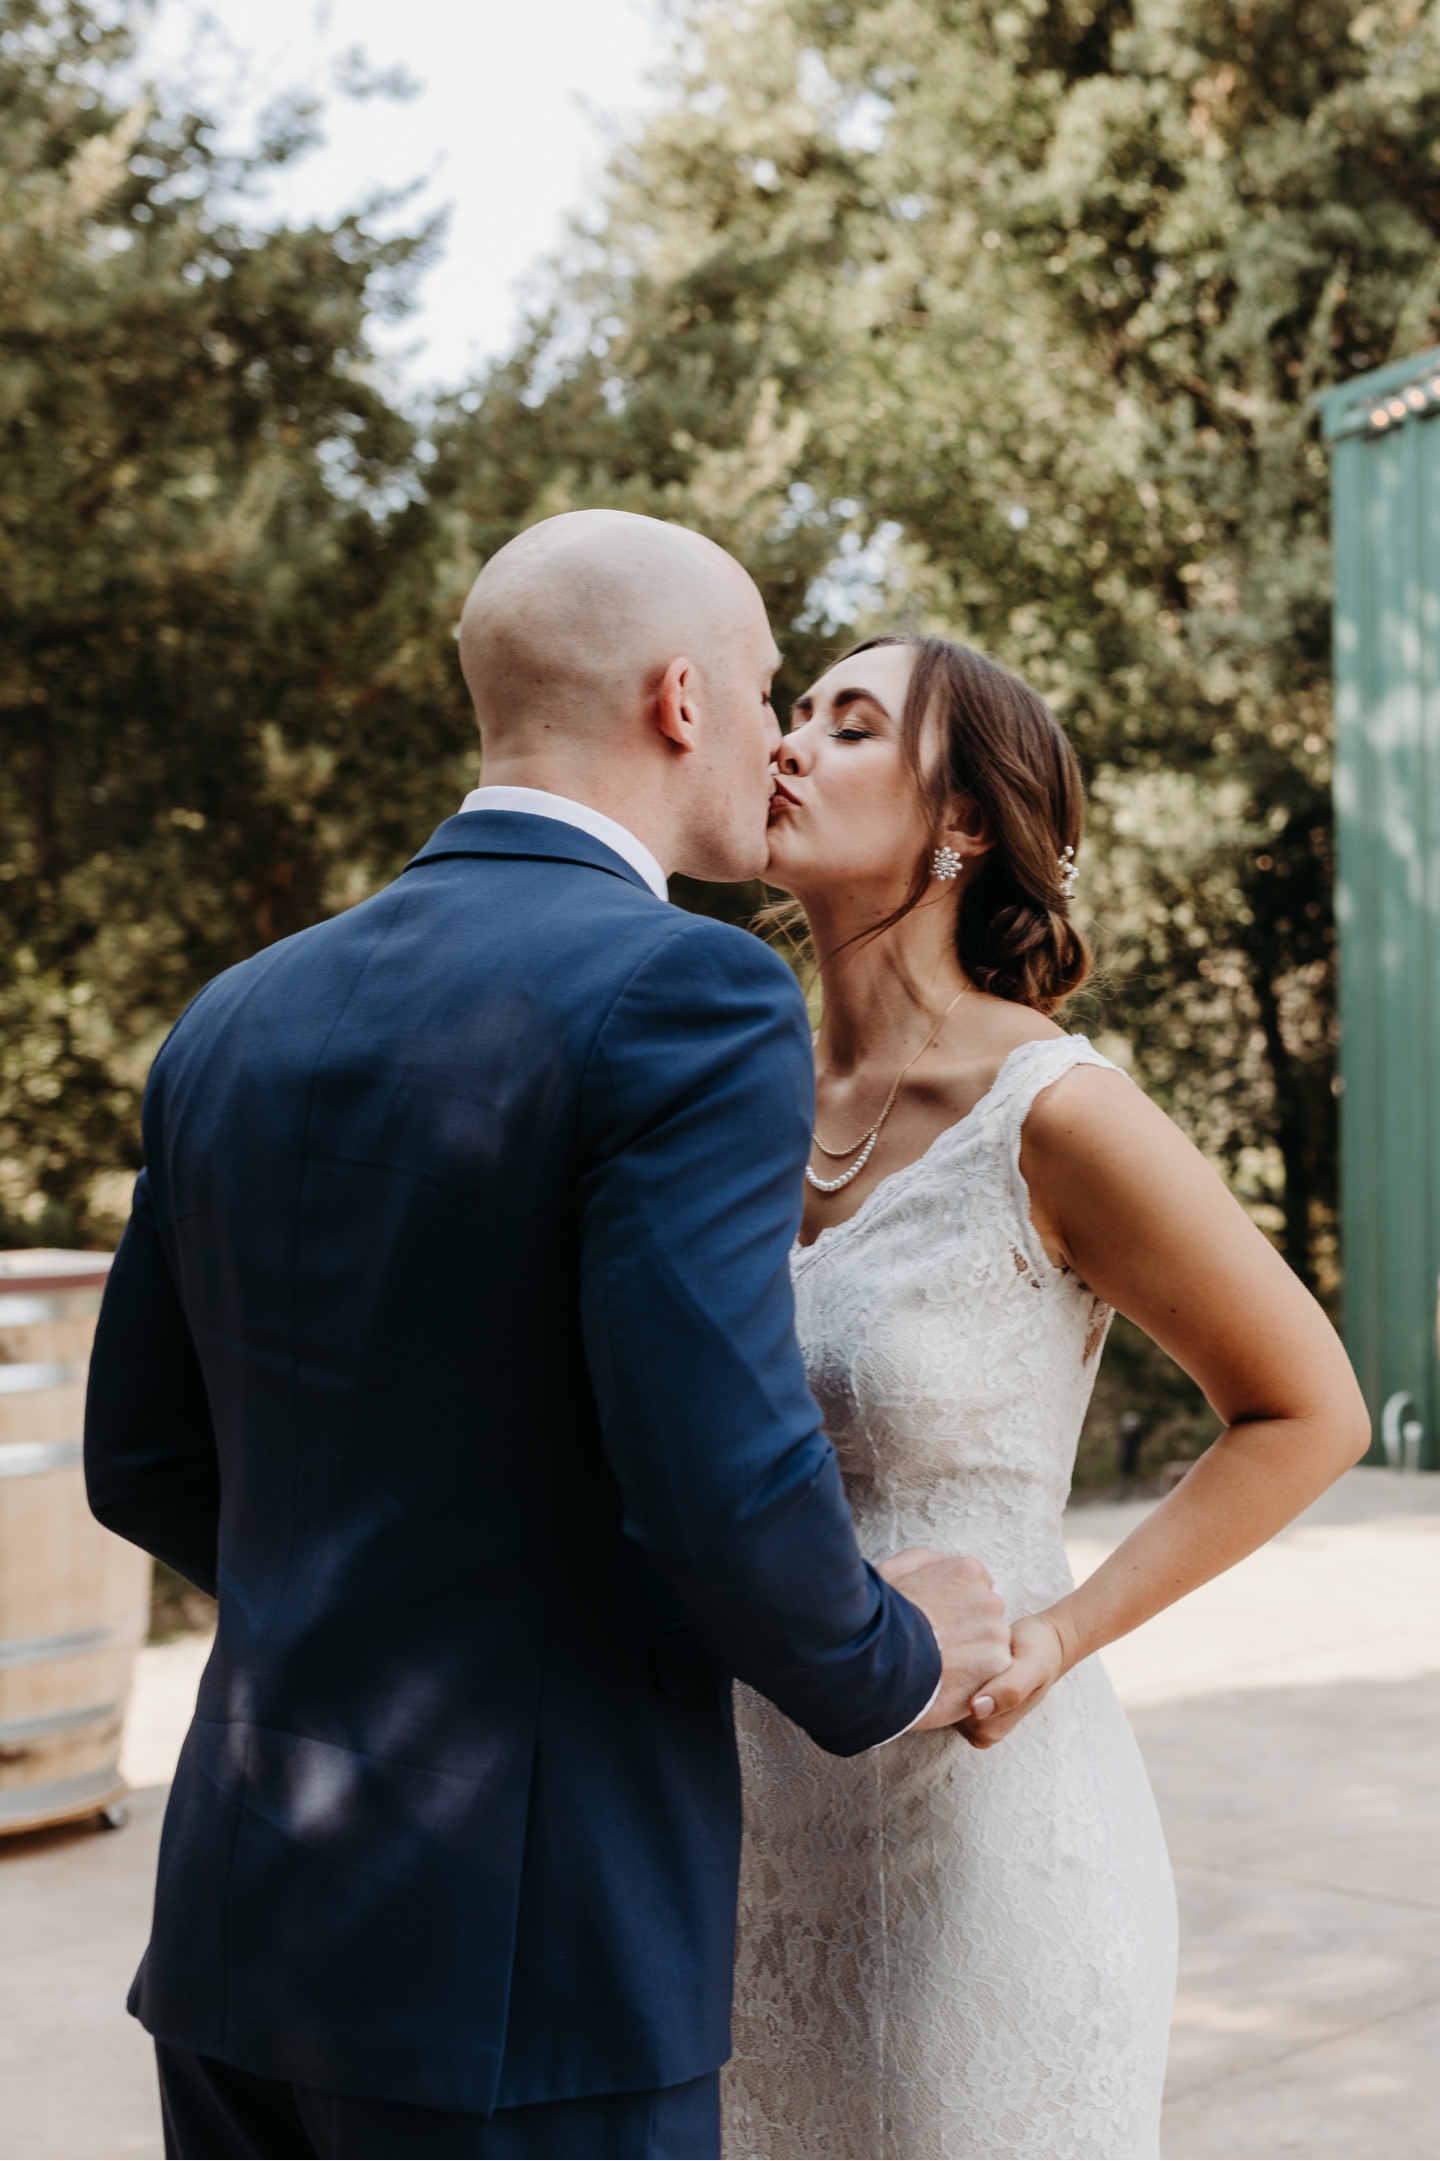 Bride and groom kiss during their first look at Juliette winery in Sacramento, California.